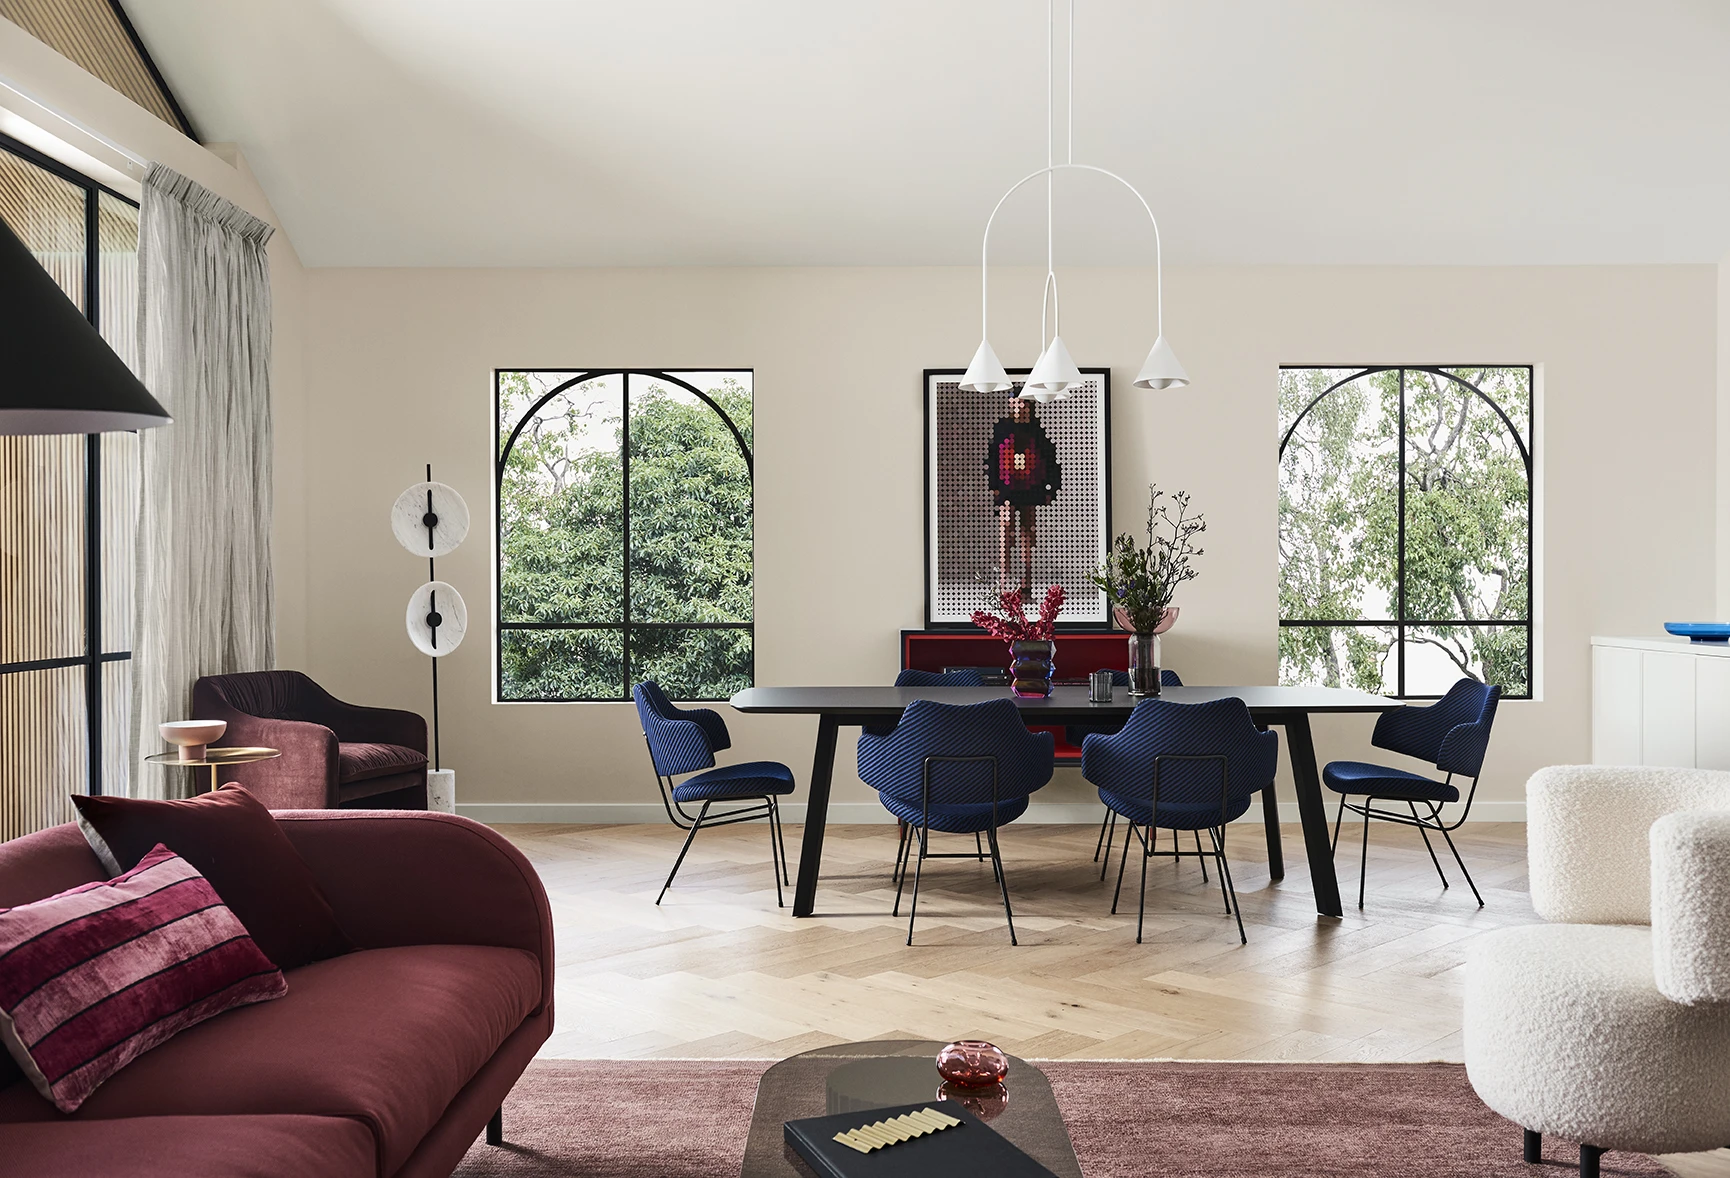 Neutral coloured dining room with black table and blue chairs around it. In the foreground is a red couch in the living room